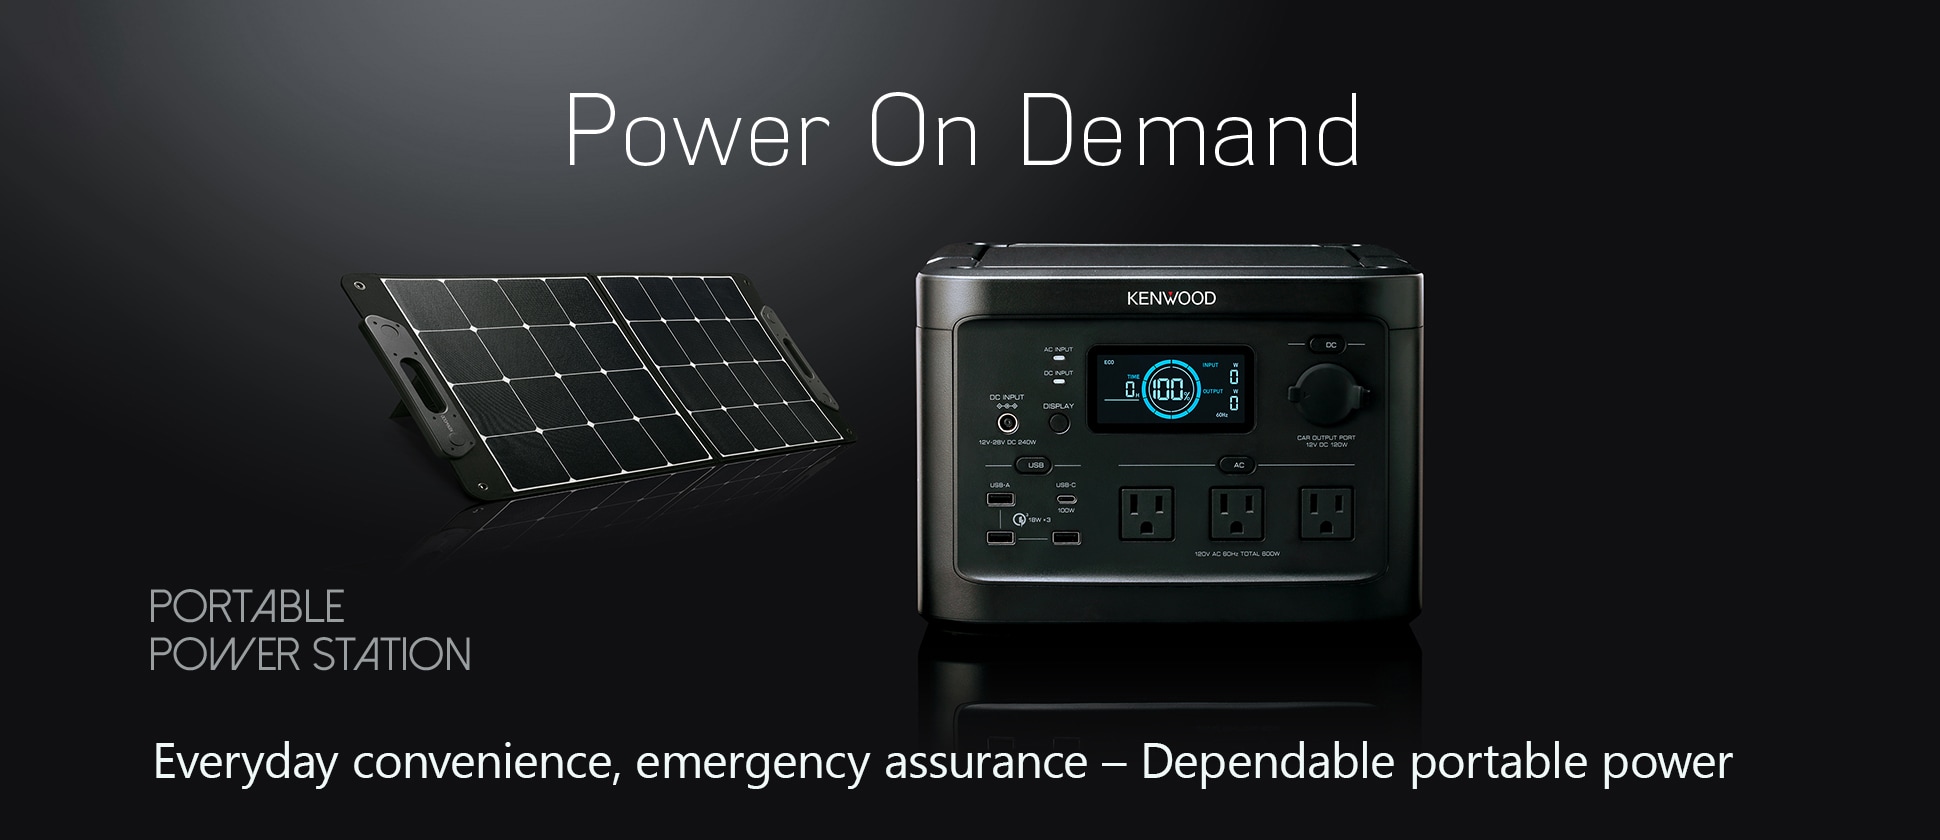 Power On Demand Everyday convenience, emergency assuramce - Dependable portable power PORTABLE POWER STATION